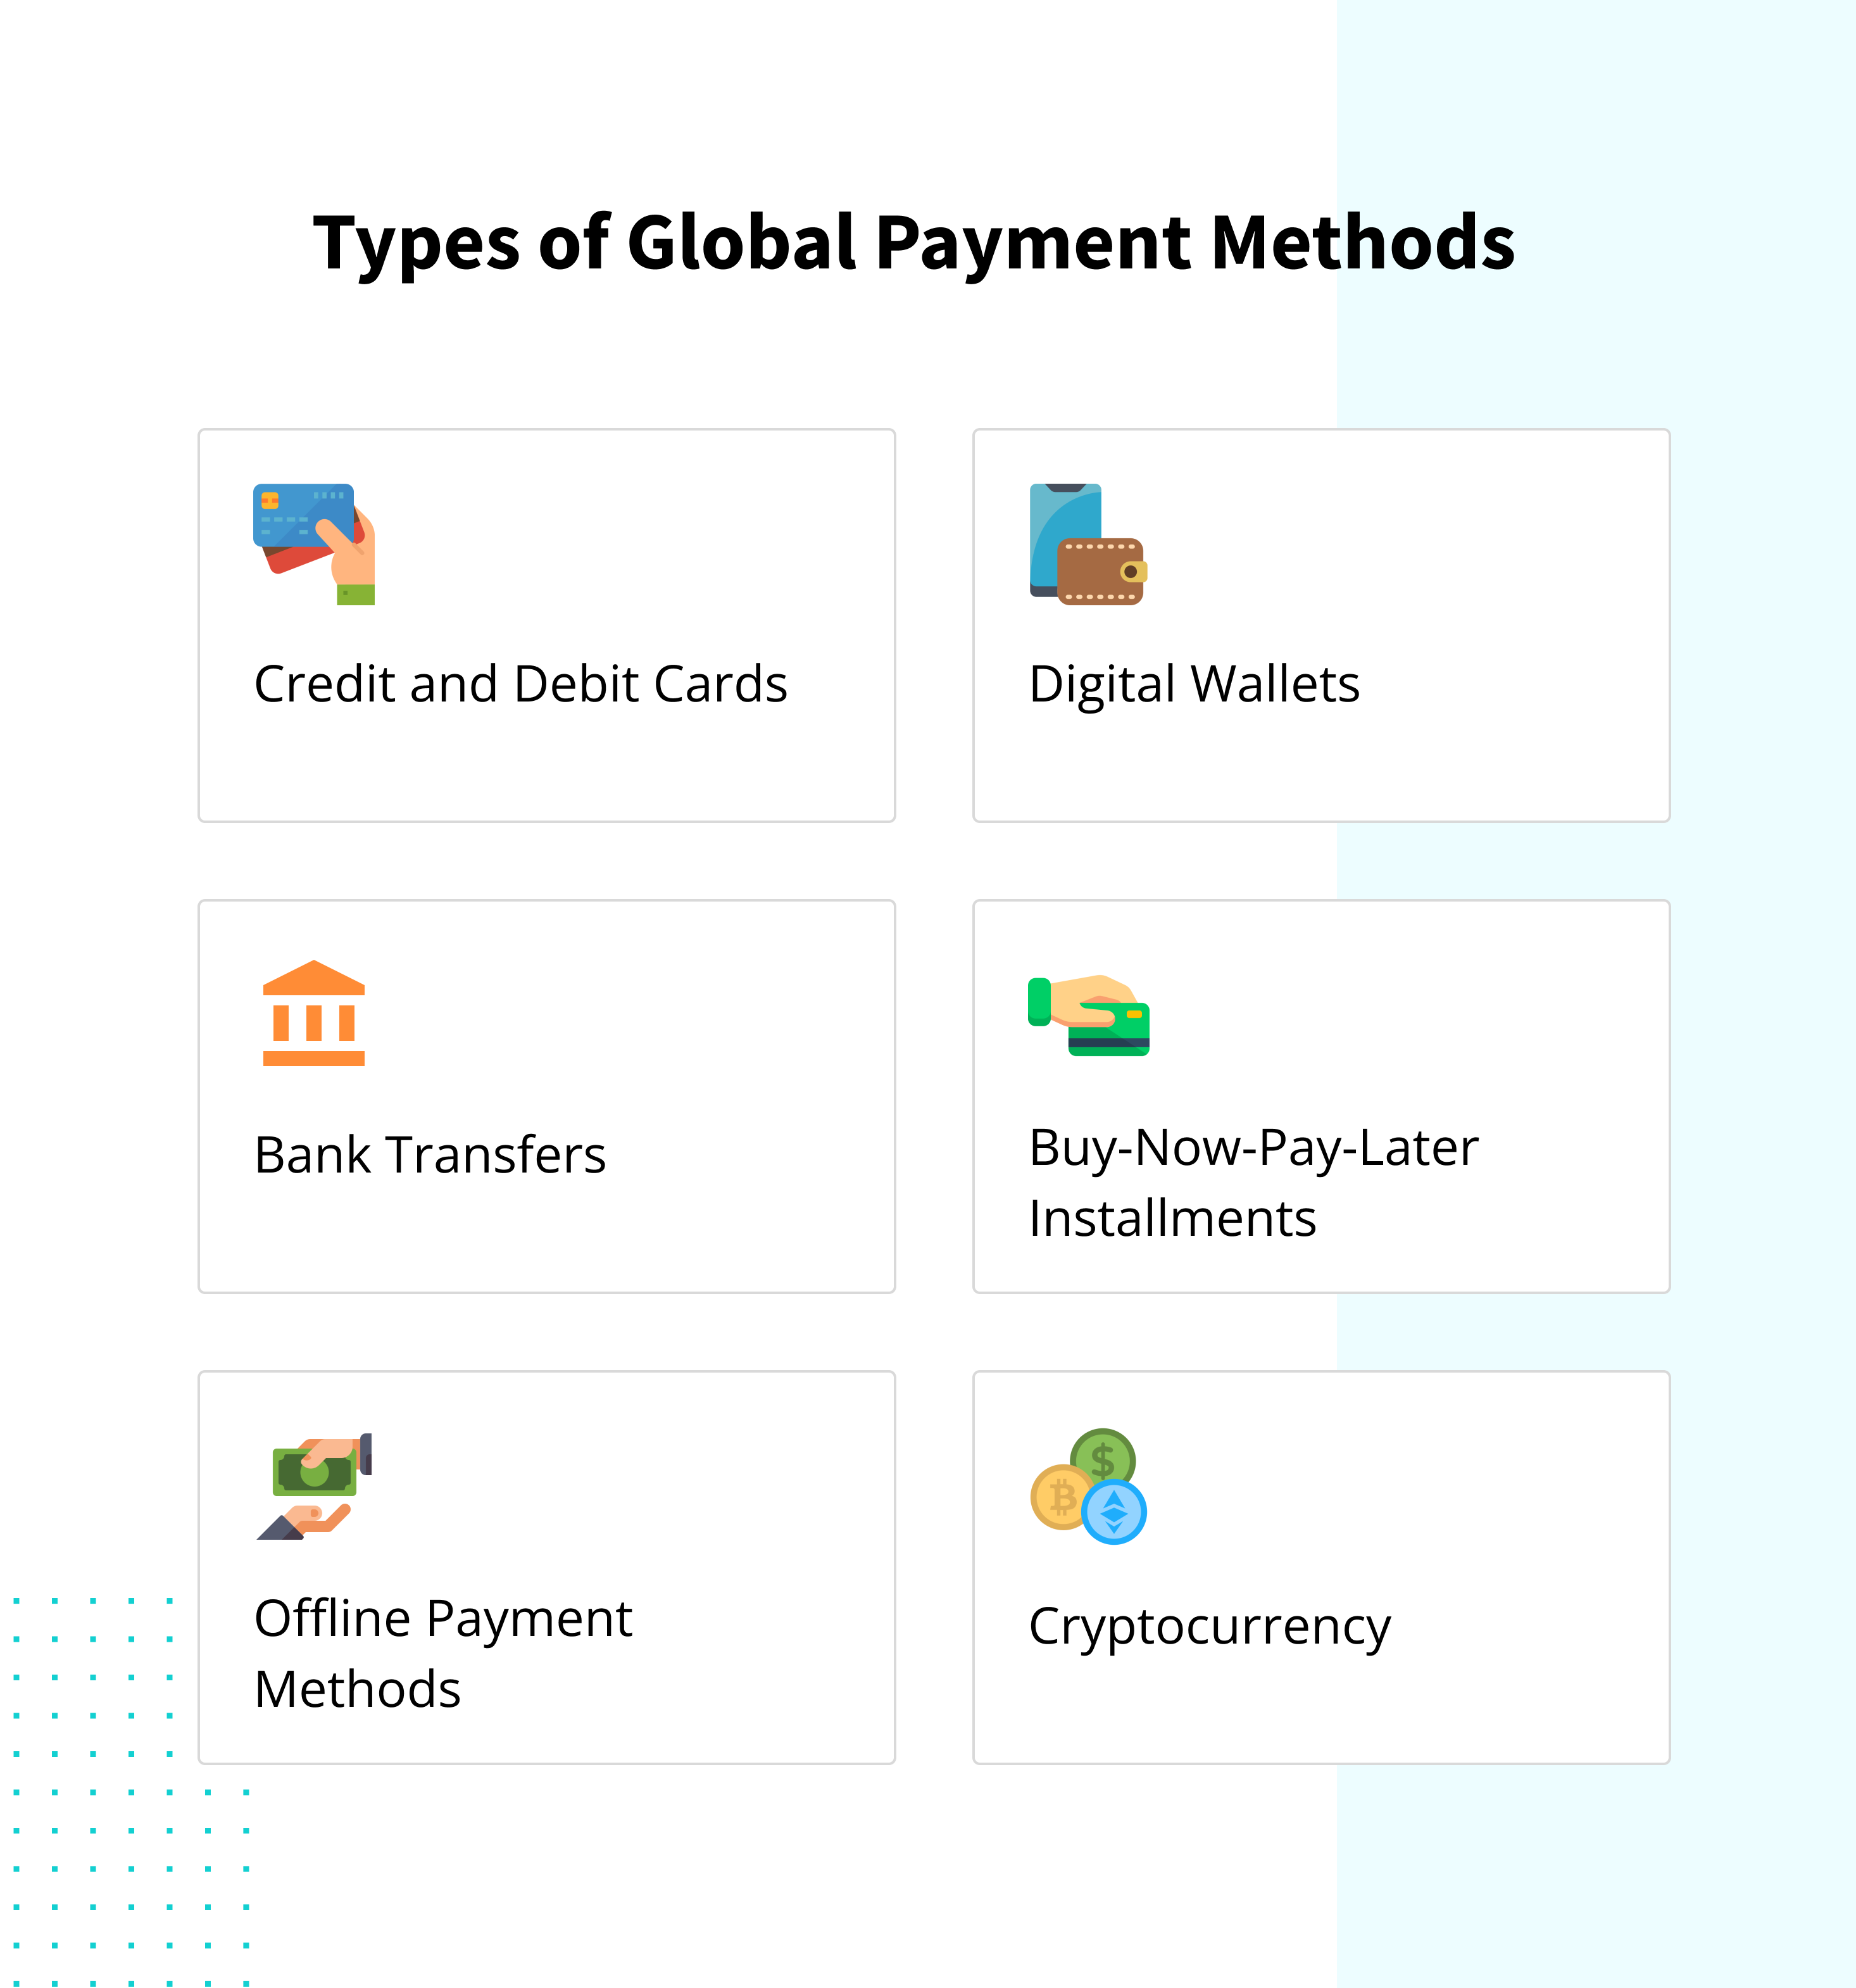 Types of Global Payment Methods